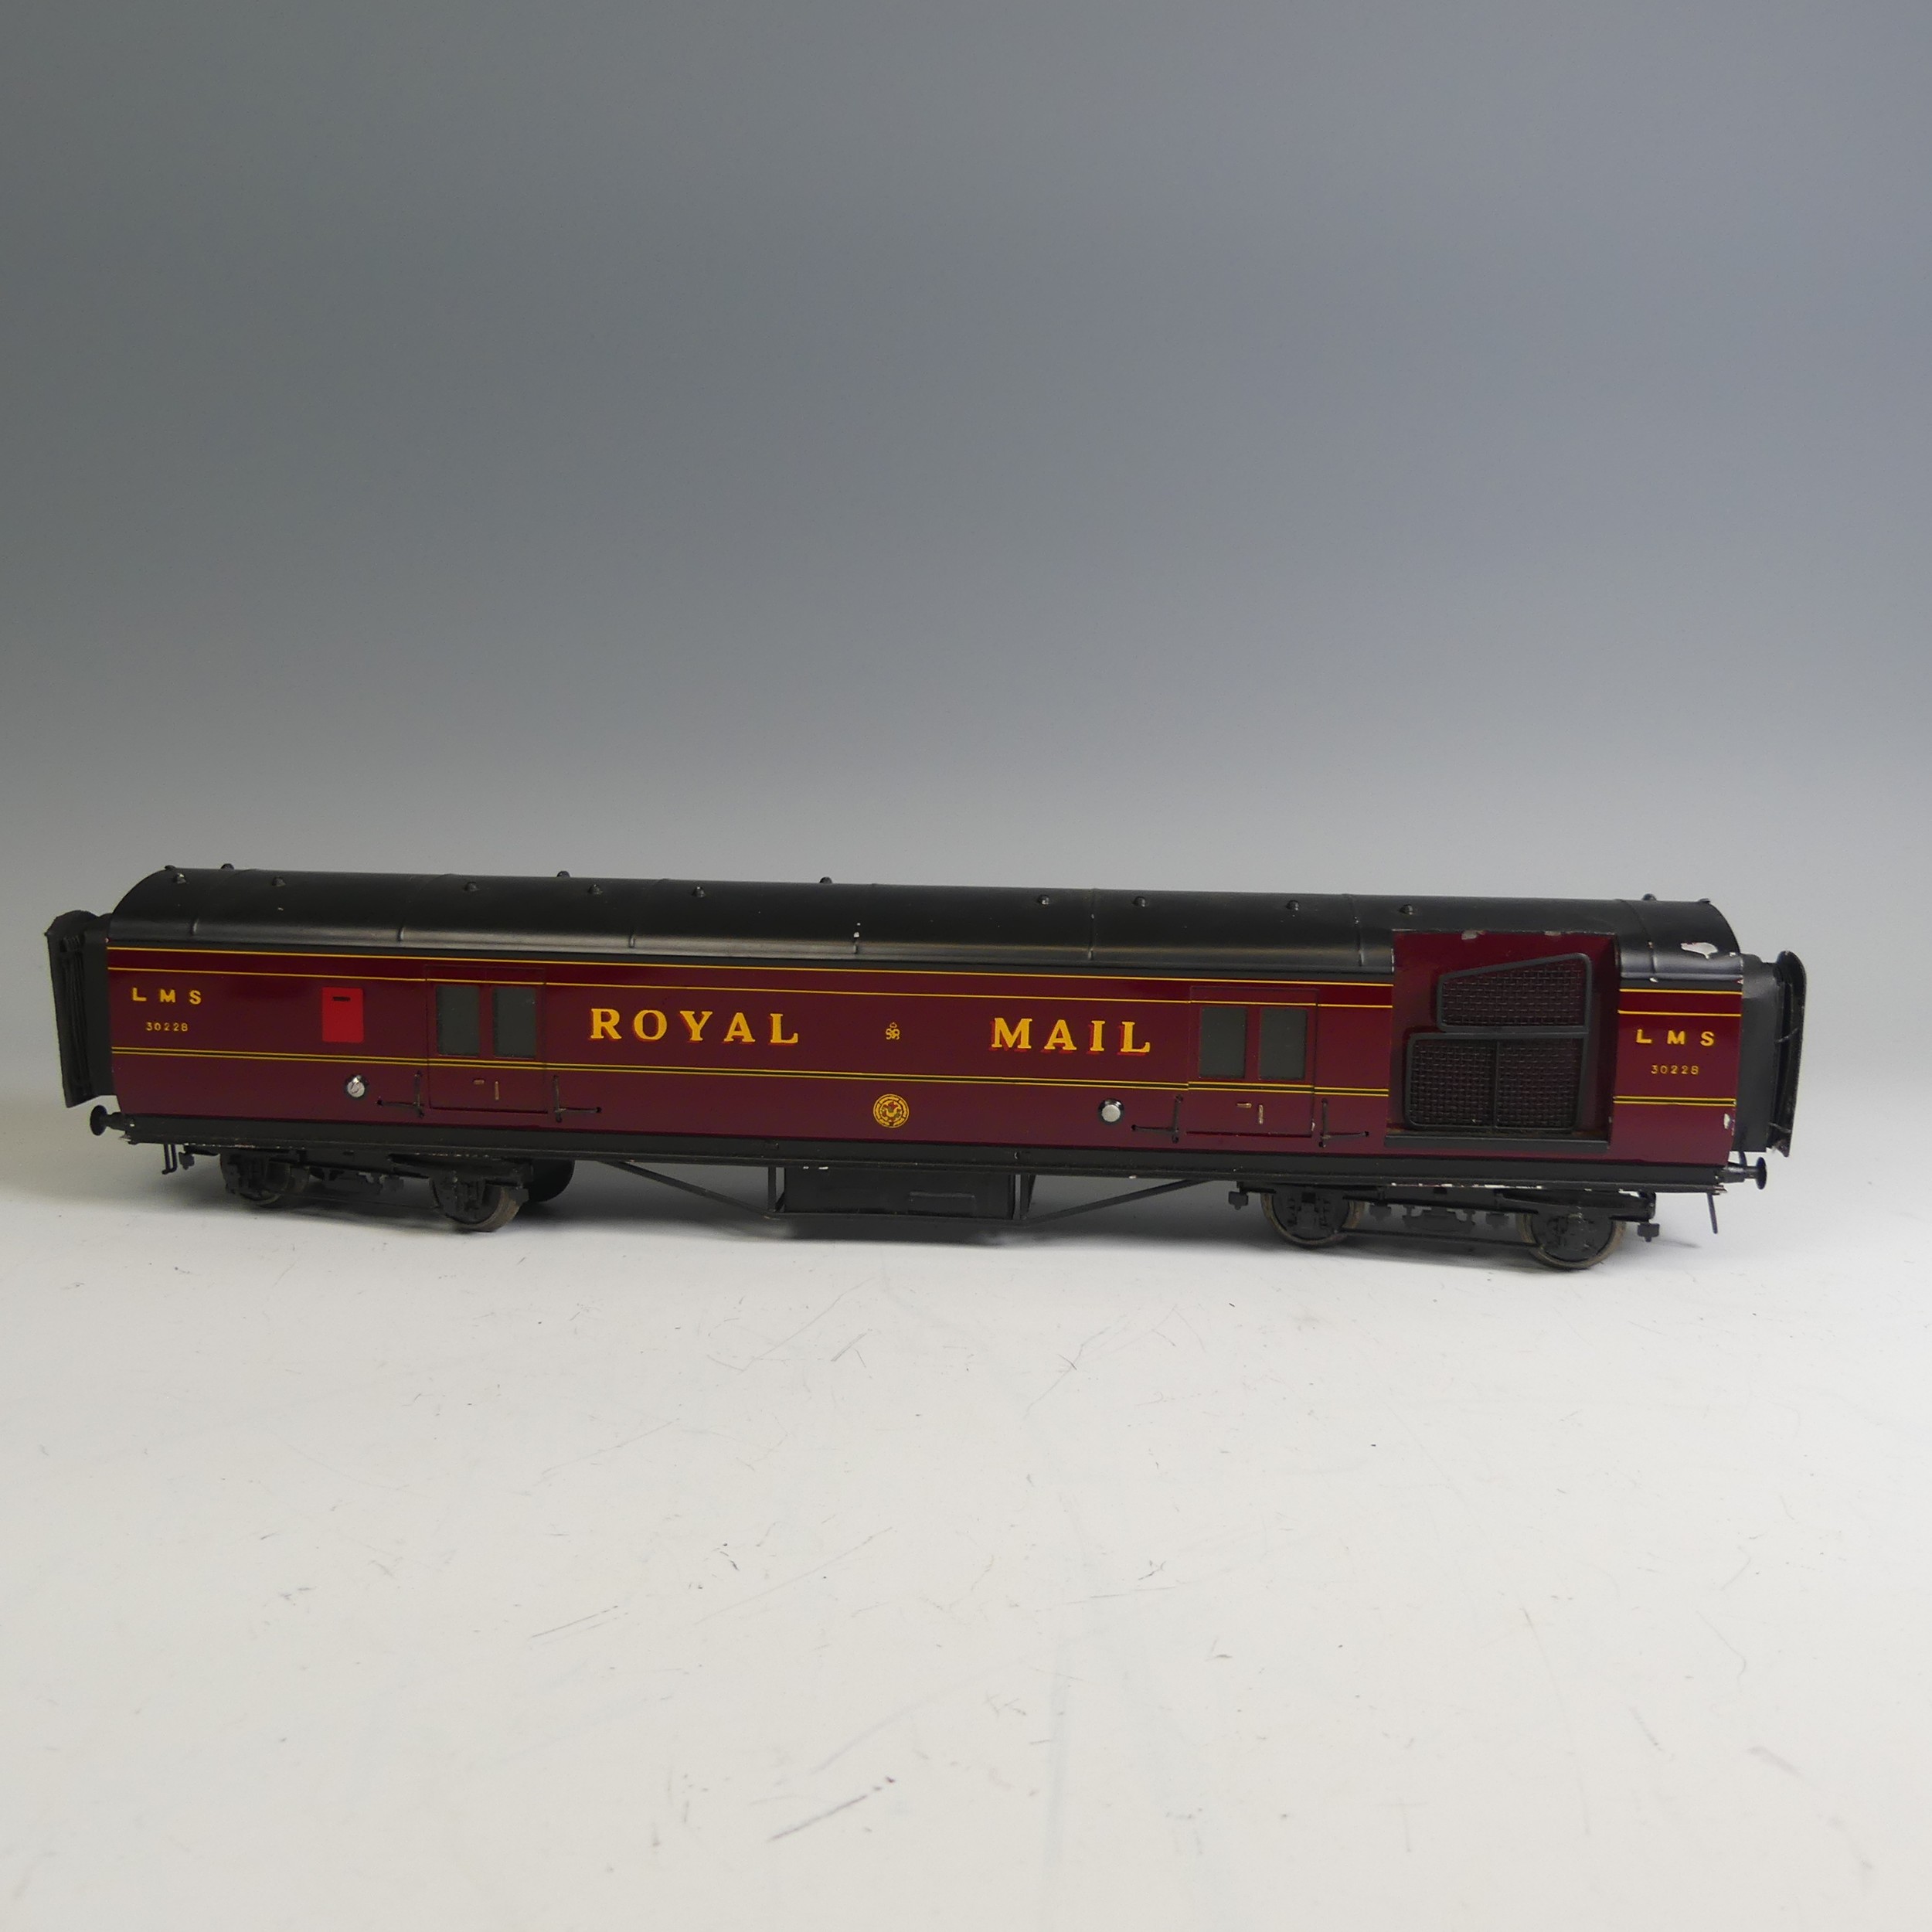 Exley ‘0’ gauge LMS Royal Mail Coach, in LMS maroon with yellow lettering, No. 30228. - Image 2 of 5